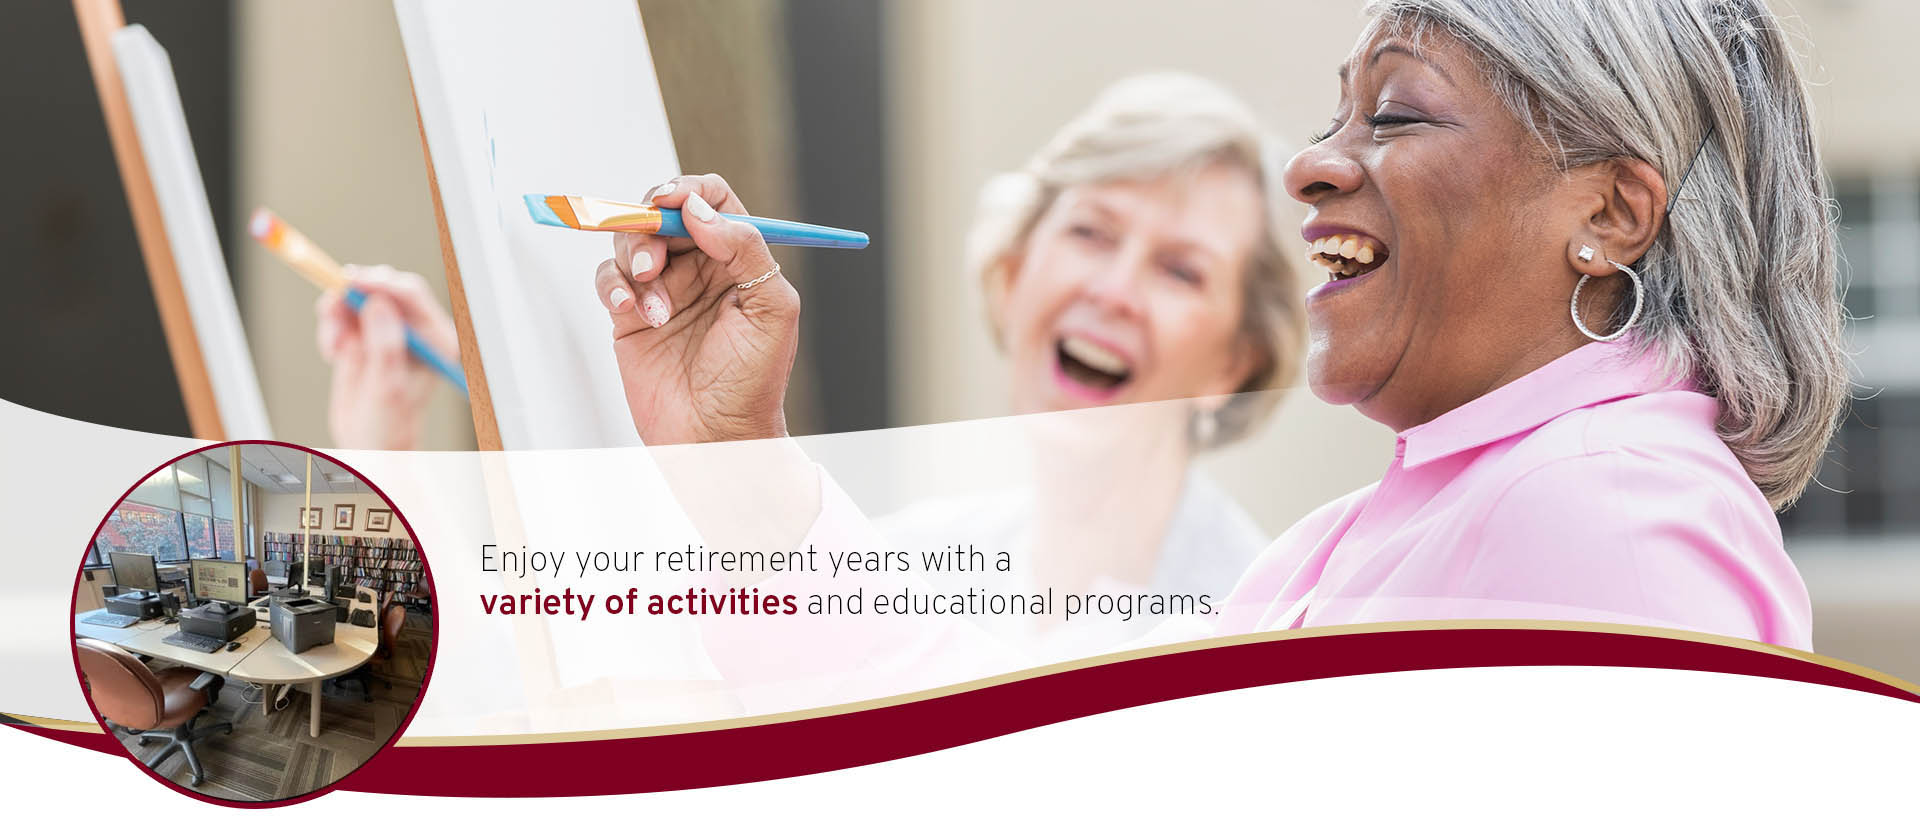 Enjoy your retirement with a wide variety of activities.